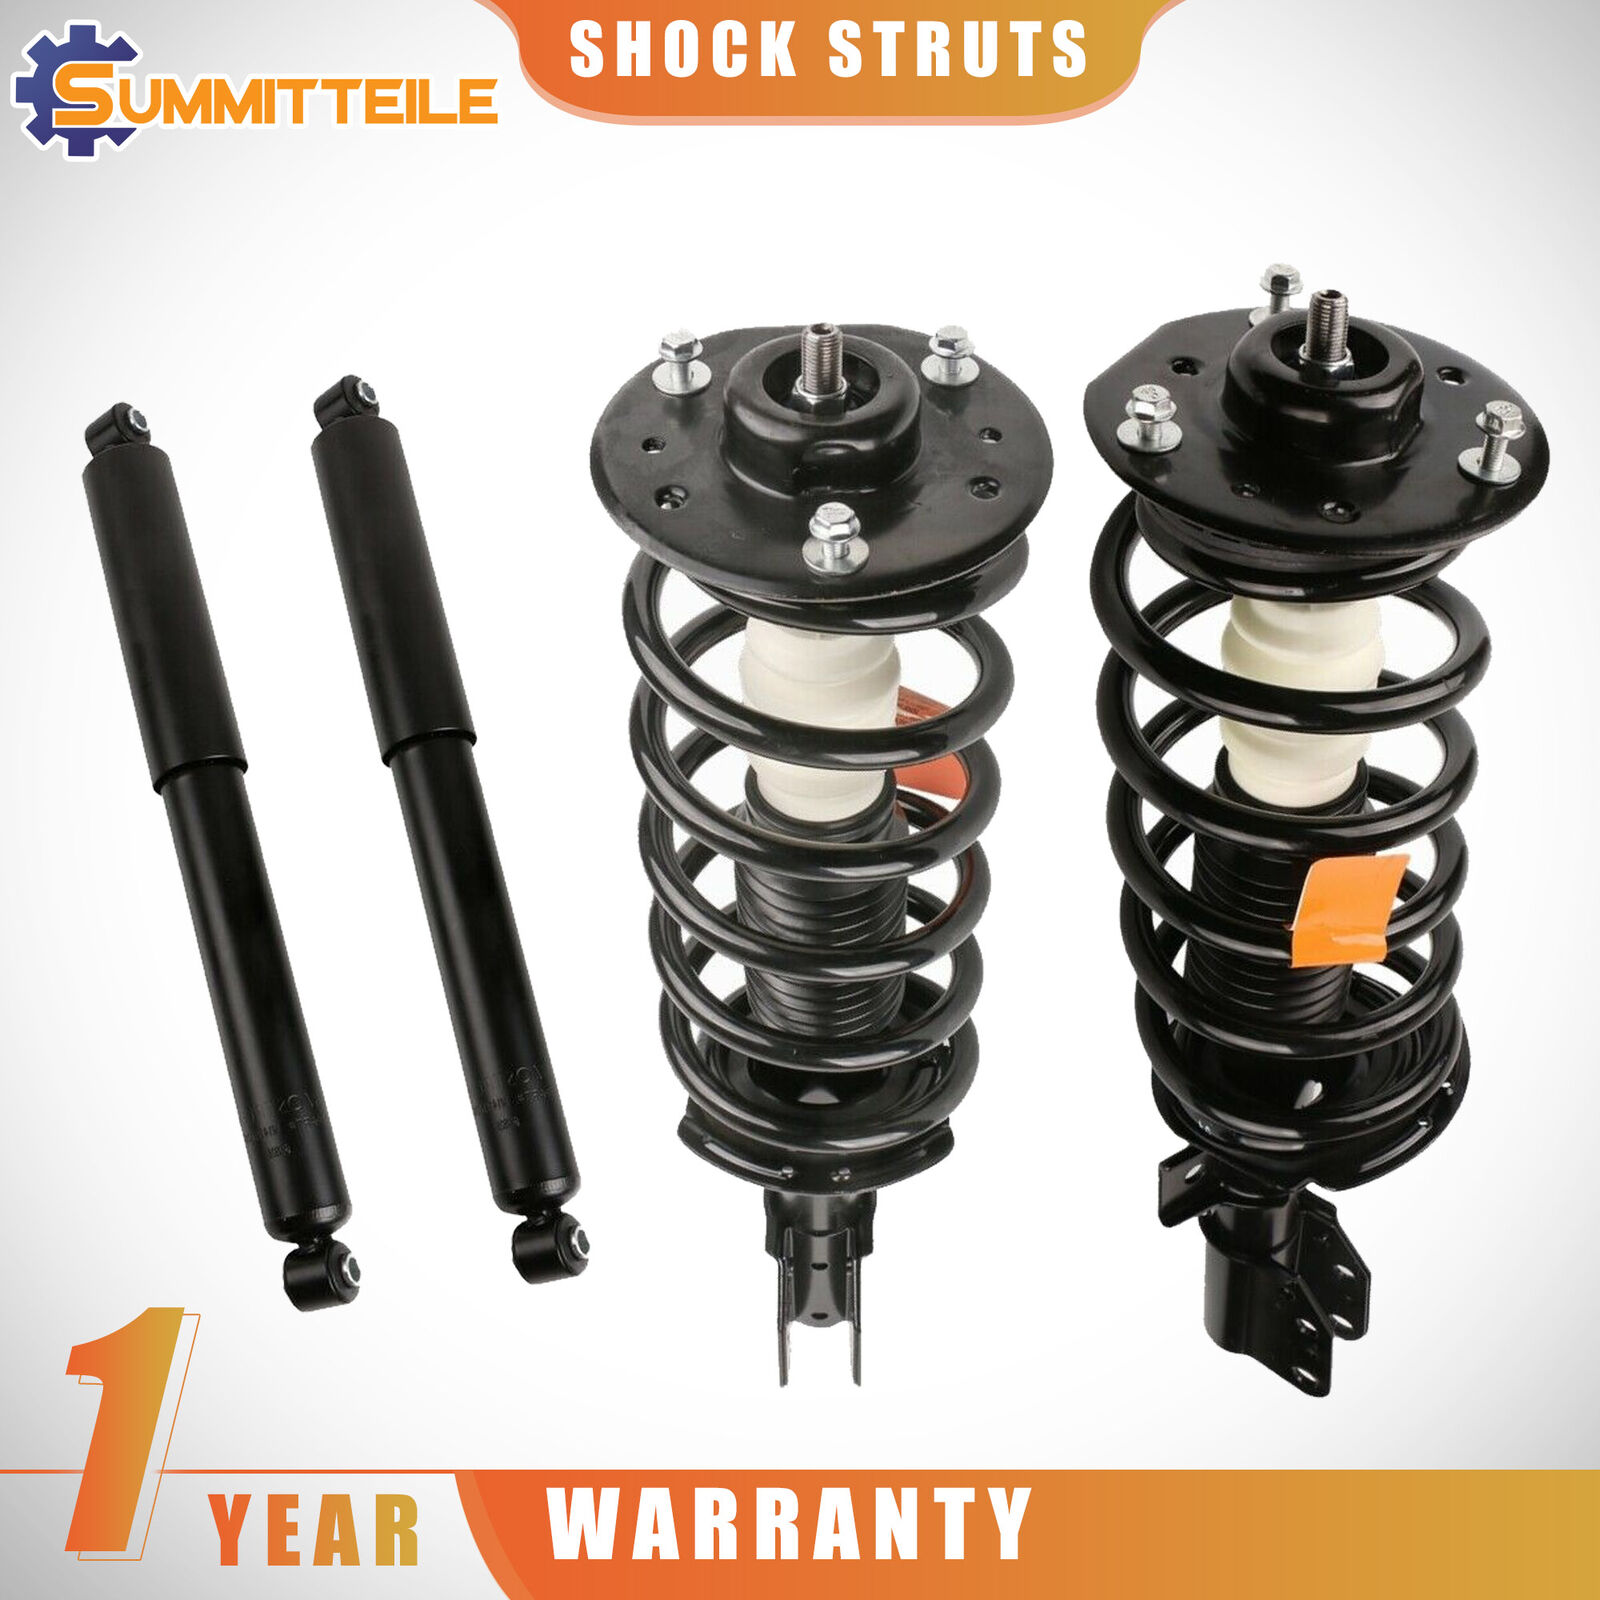 4X Left Right Front Strut & Rear Shock For 05-06 Chevy Equinox 06 PontiacTorrent